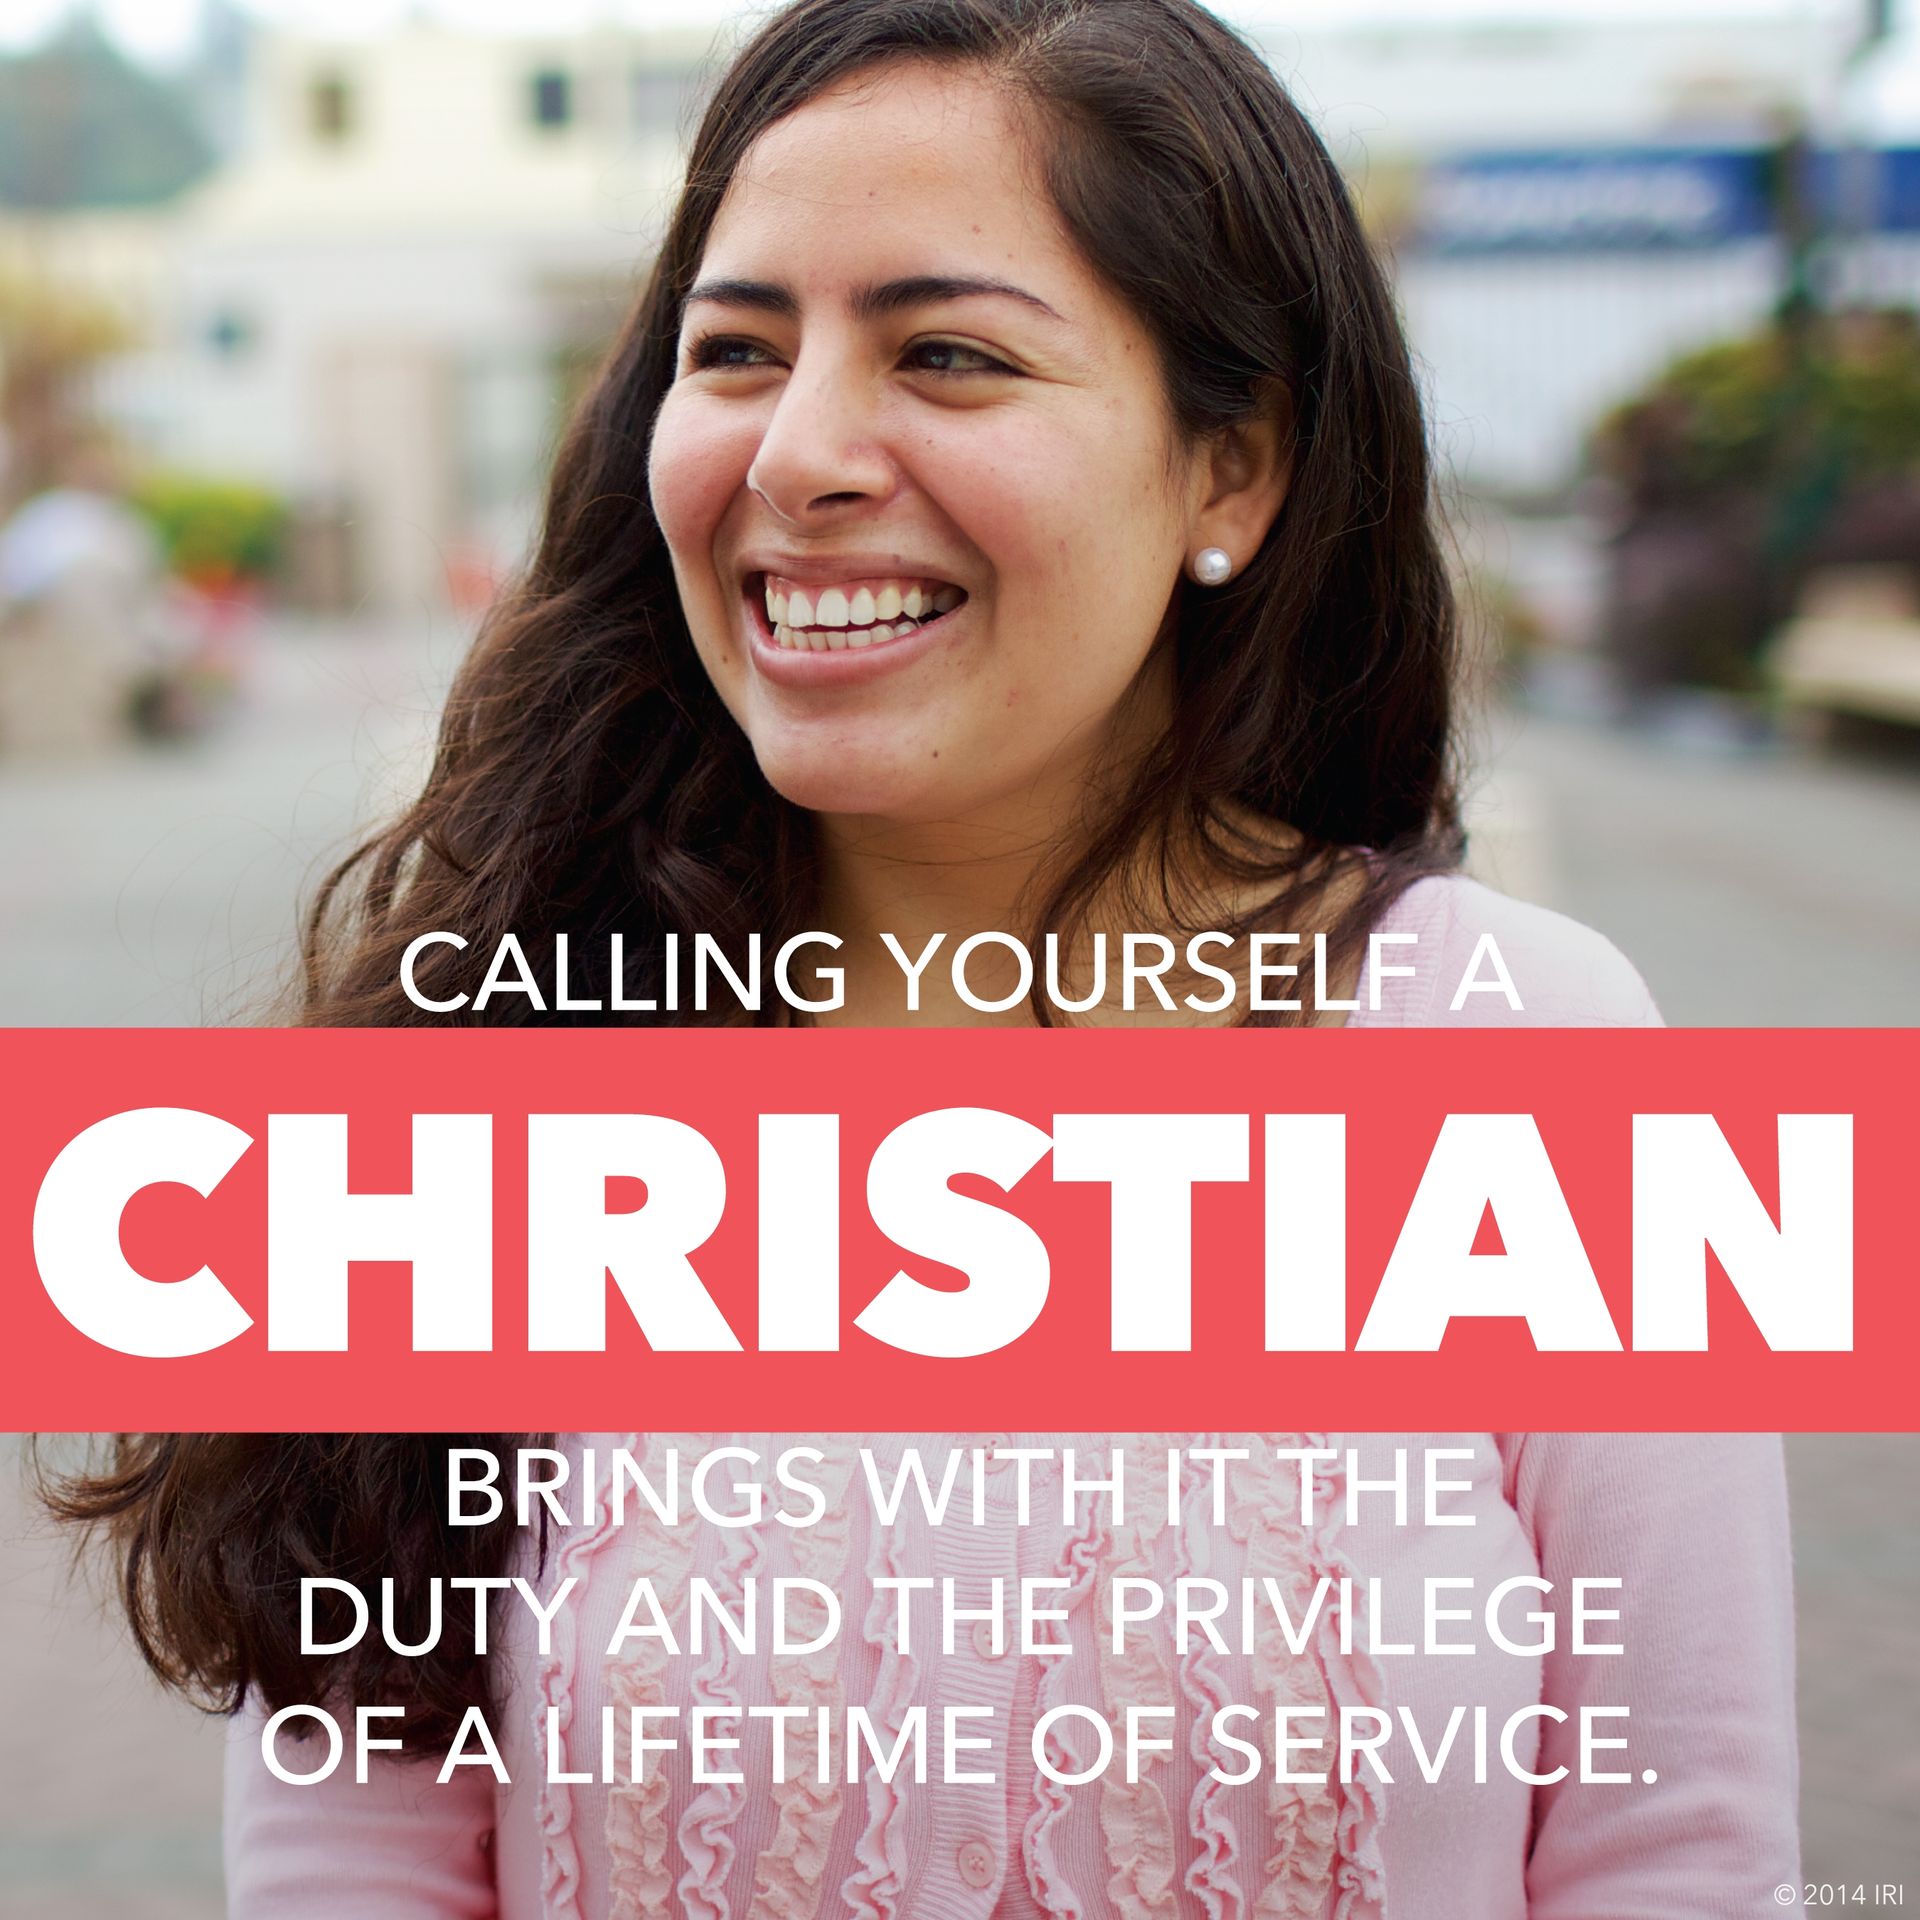 “Calling yourself a Christian brings with it the duty and the privilege of a lifetime of service.”—Mormon.org, “Values: Helping Others” © undefined ipCode 1.